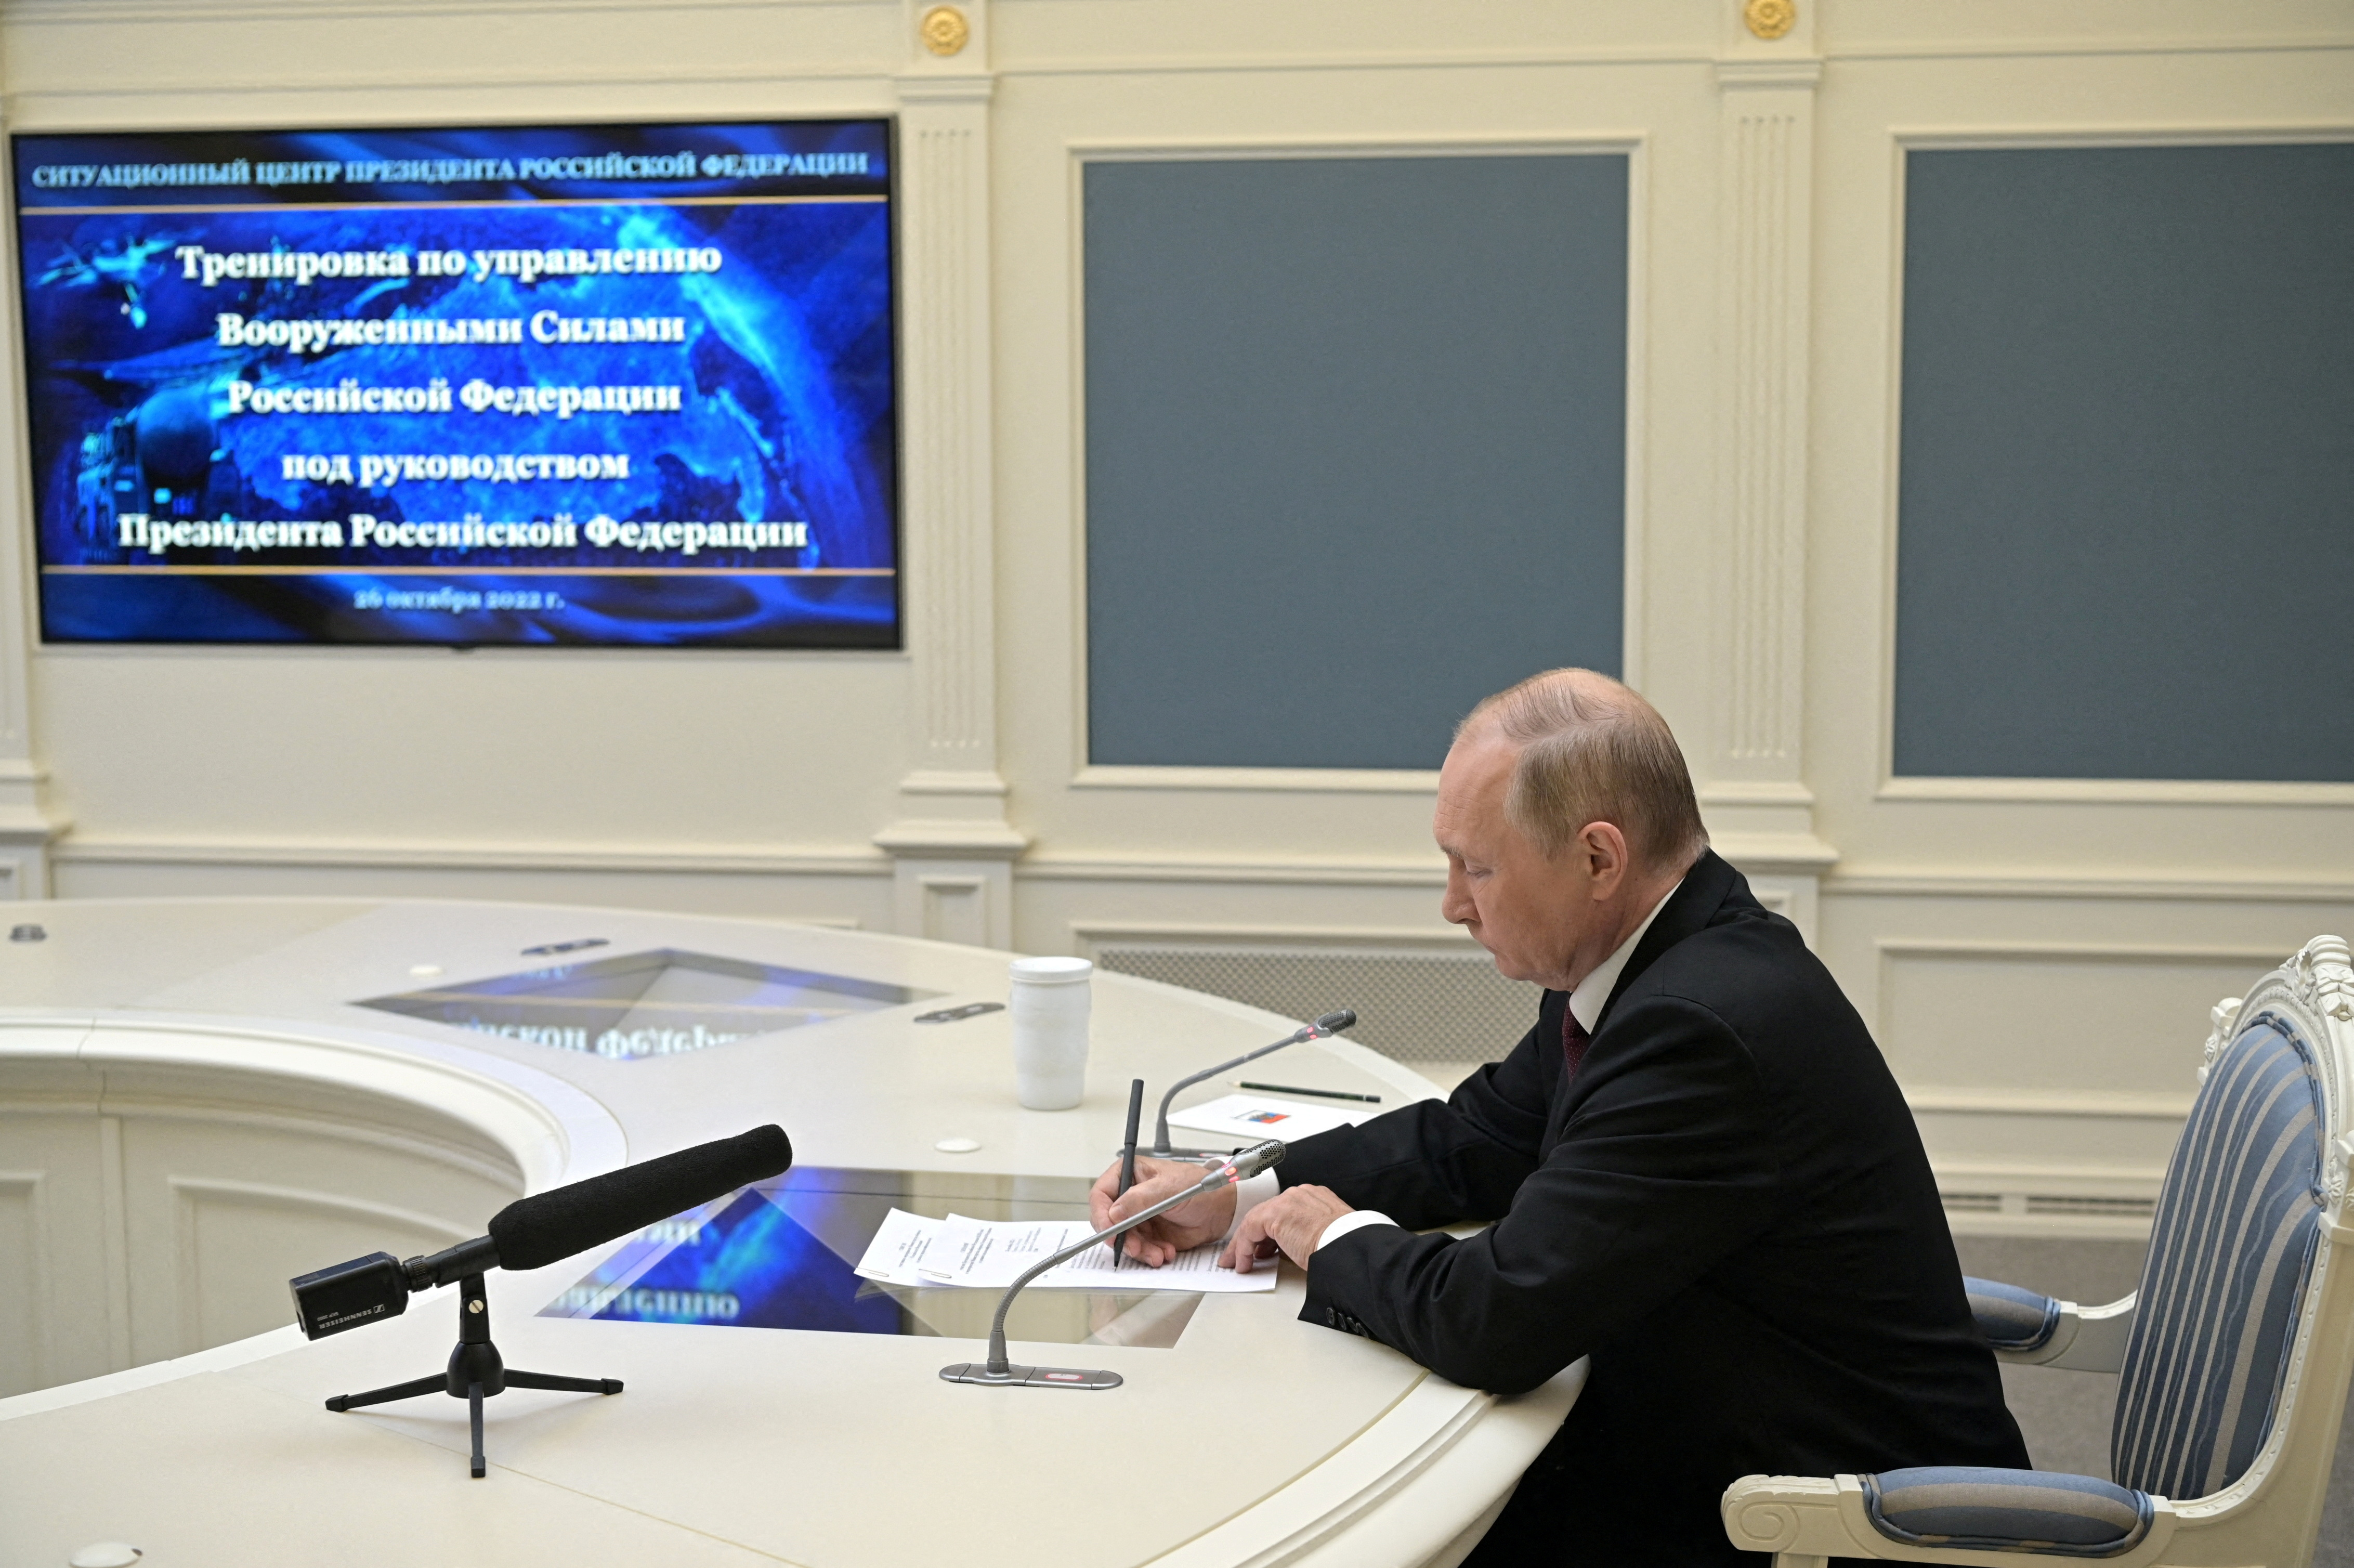 Russian President Putin observes strategic nuclear forces' exercises